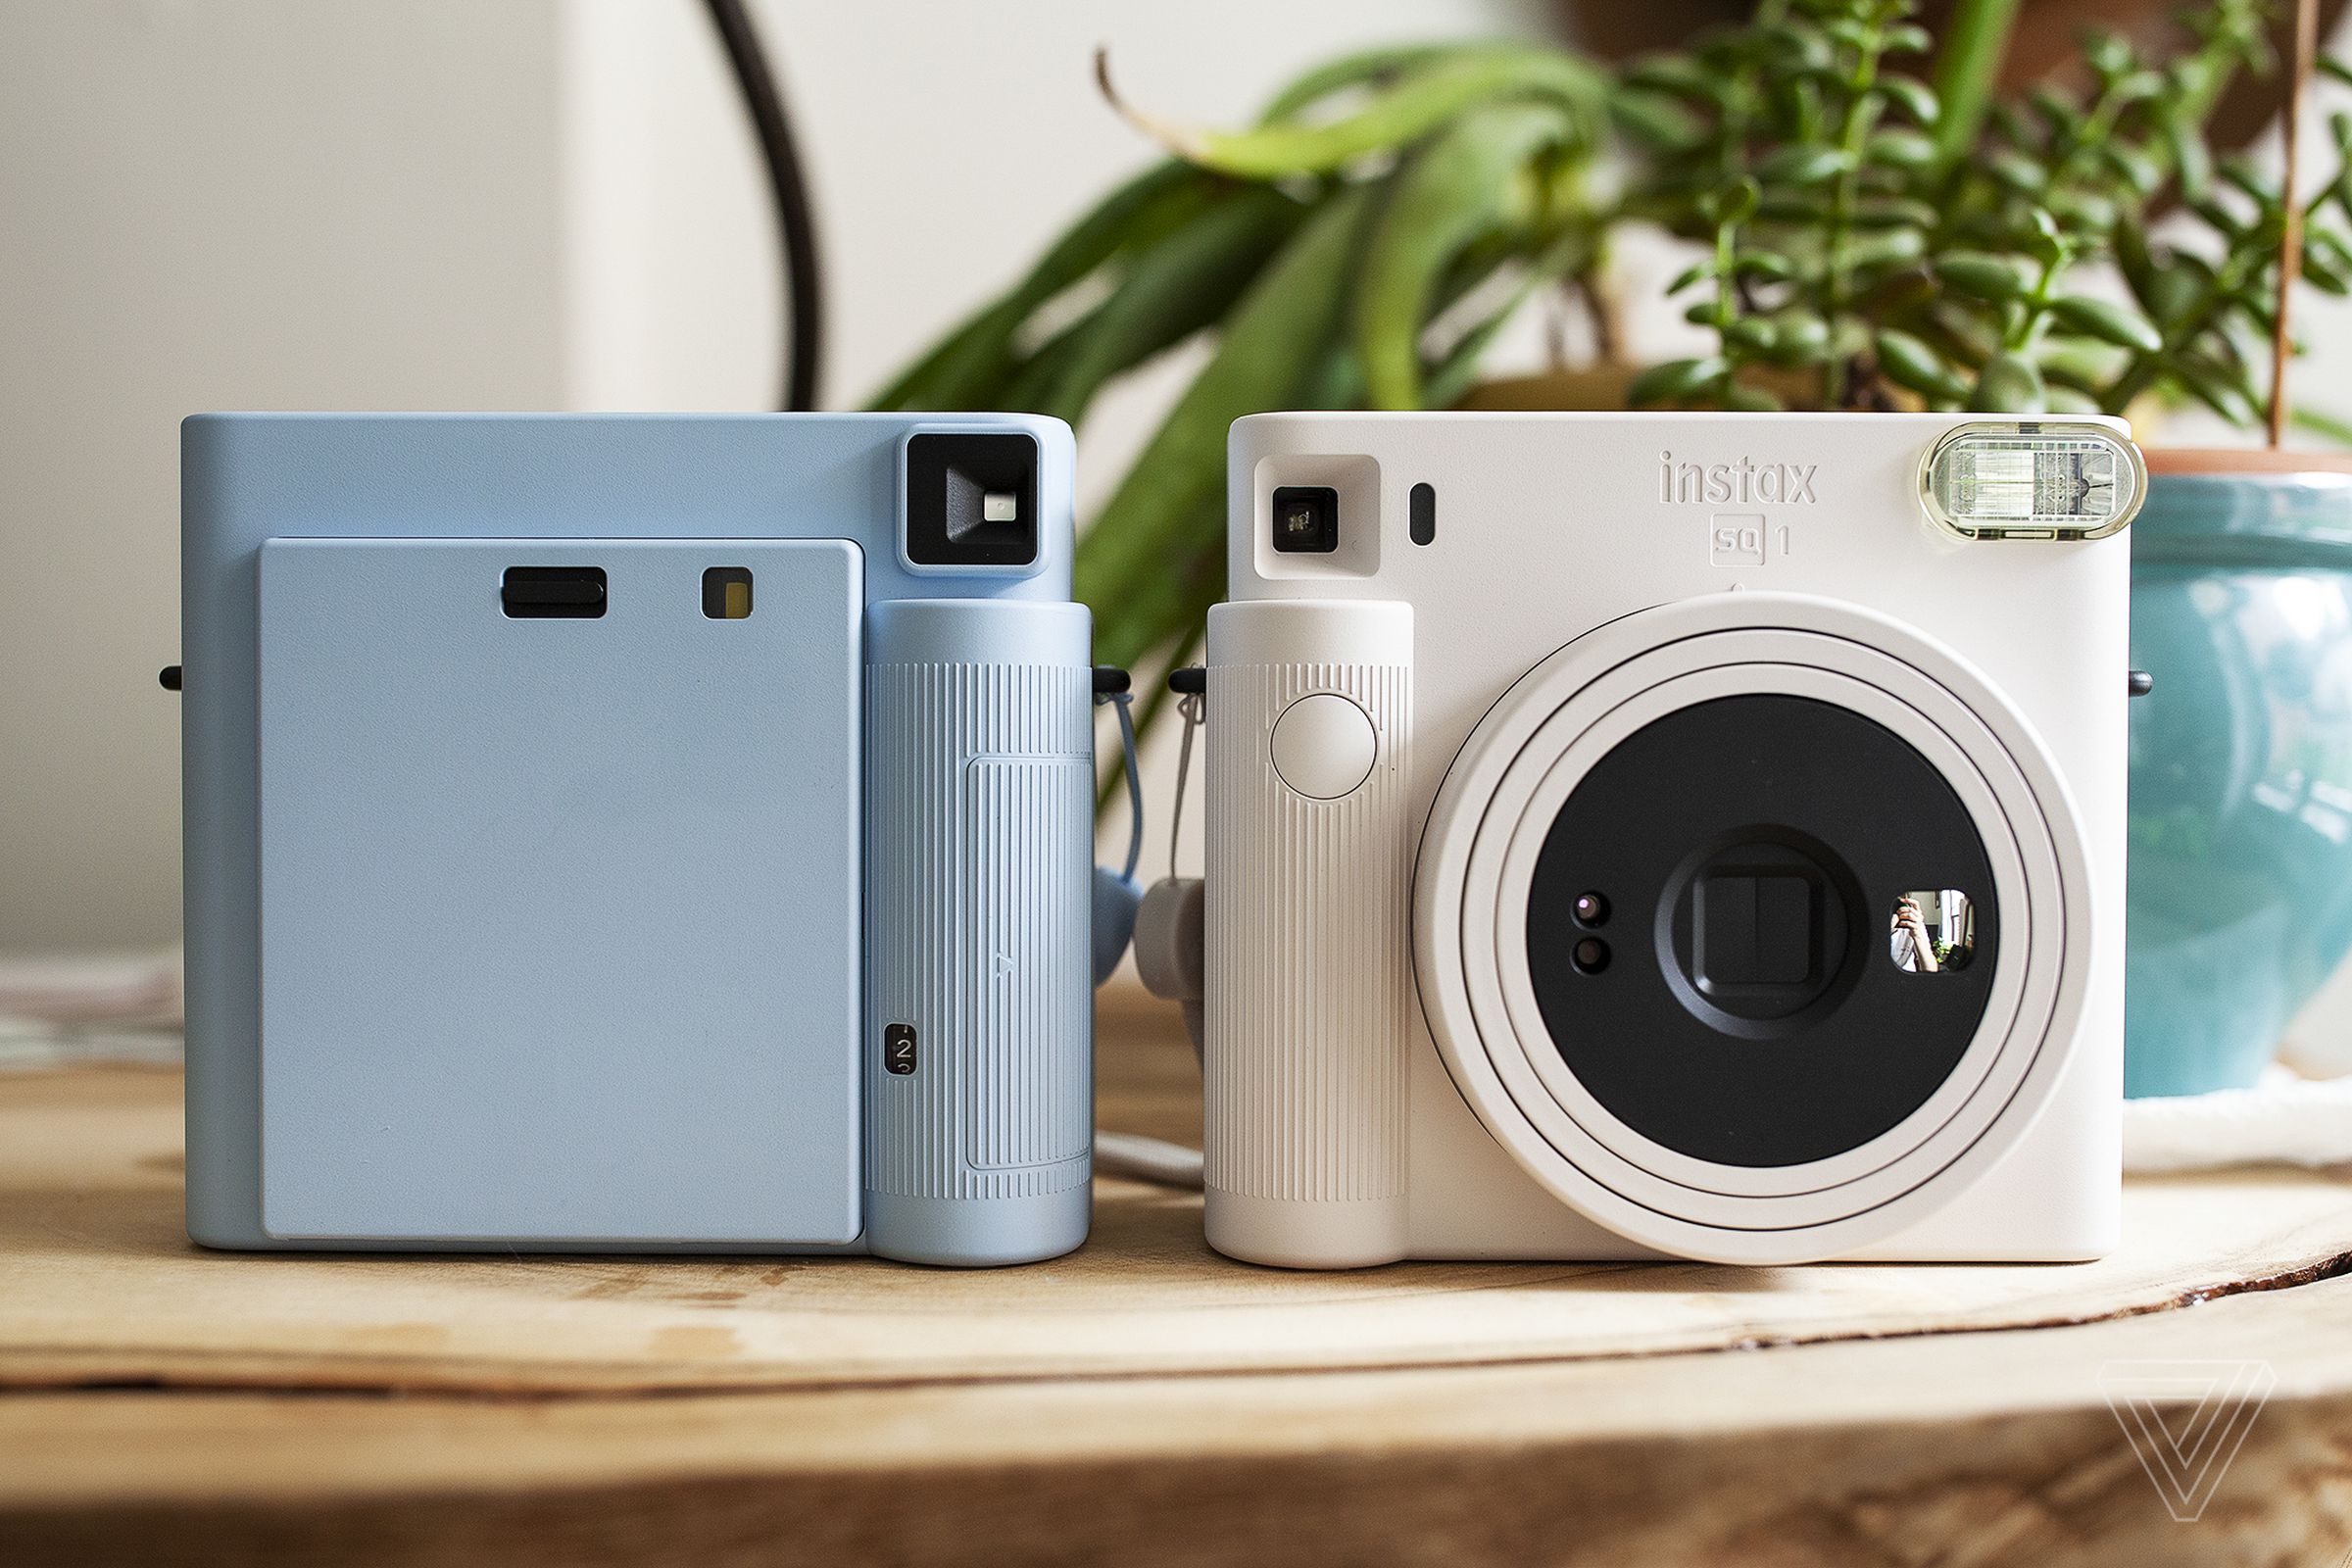 Fujifilm’s Instax Square SQ1 is always a welcome gift, one that is currently selling at an all-time low.